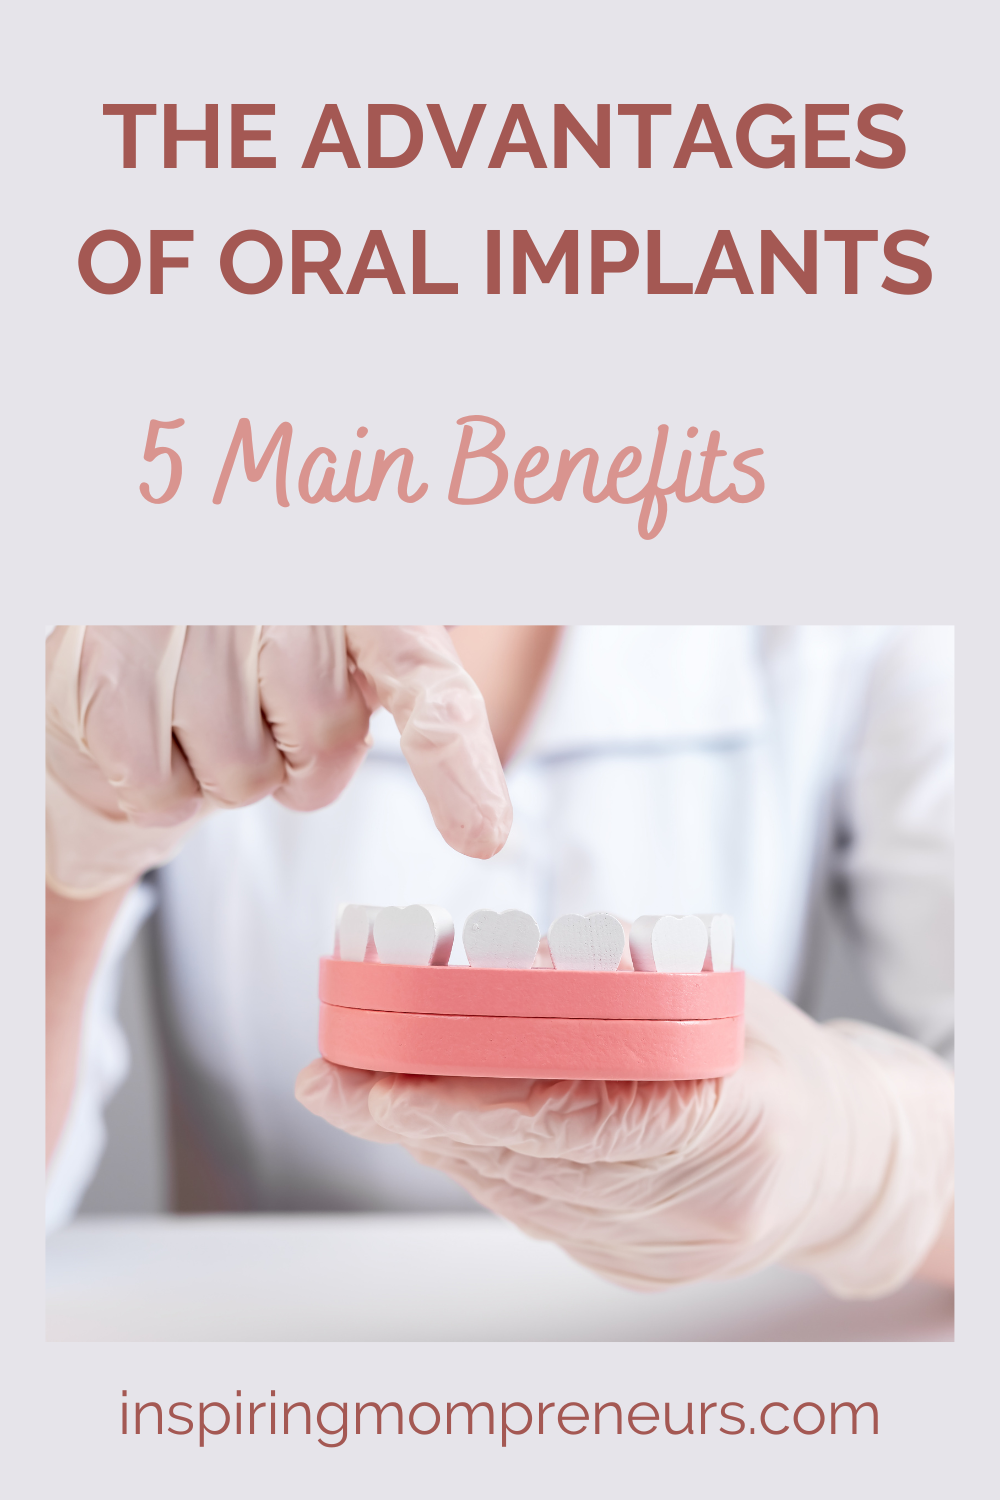 The Advantages of Oral Implants | 5 Main Benefits | Advantages of Oral Implants pin